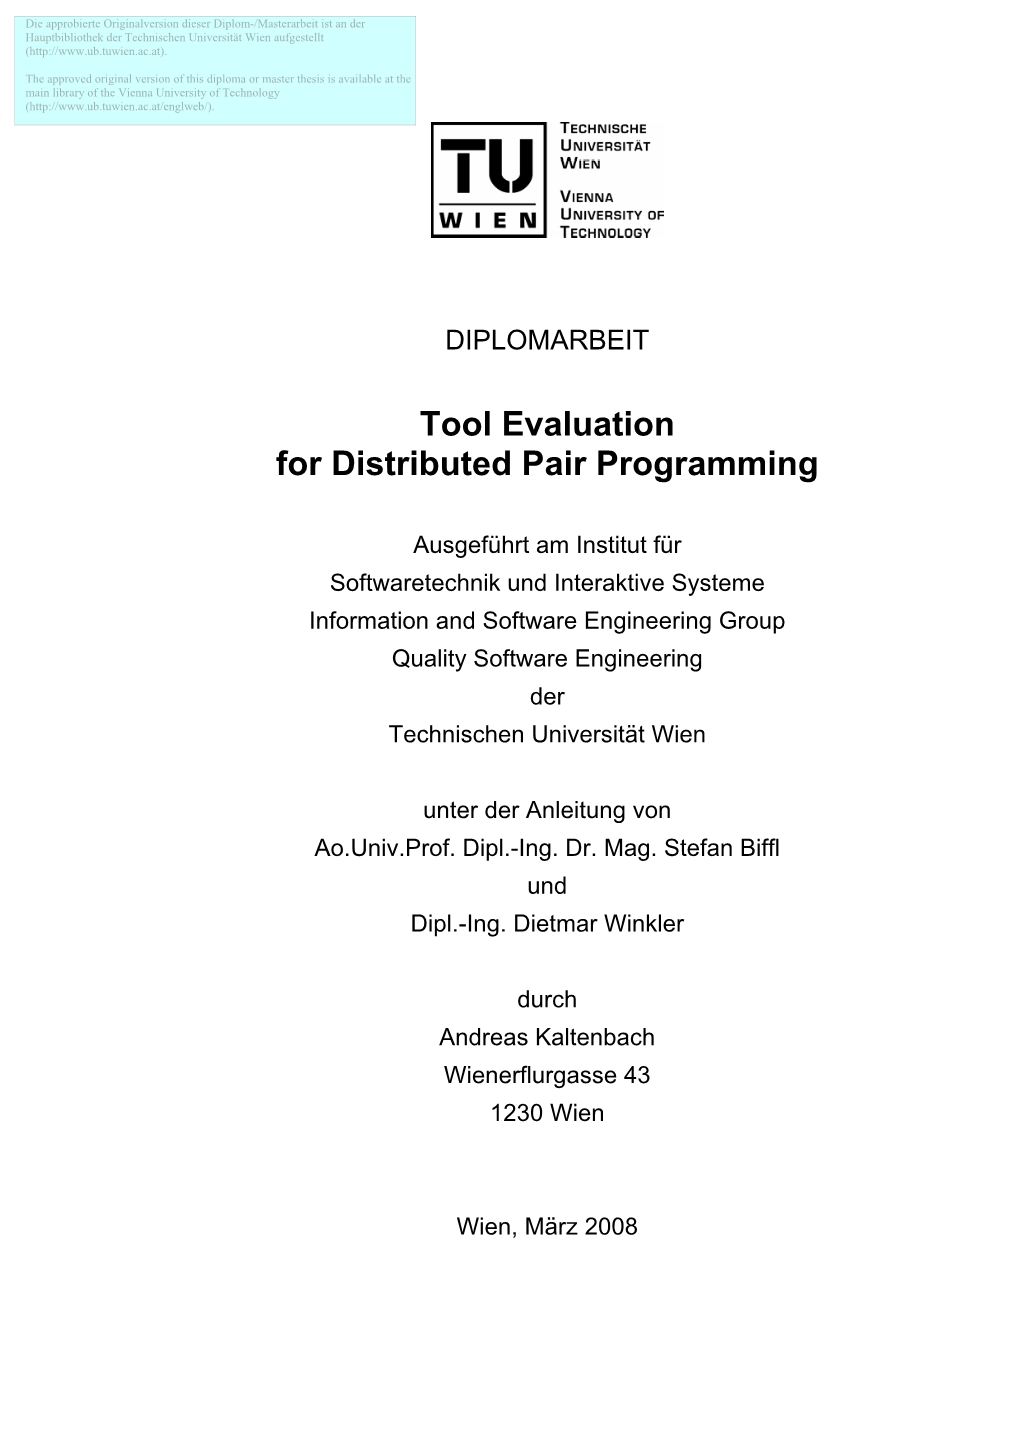 Tool Evaluation for Distributed Pair Programming